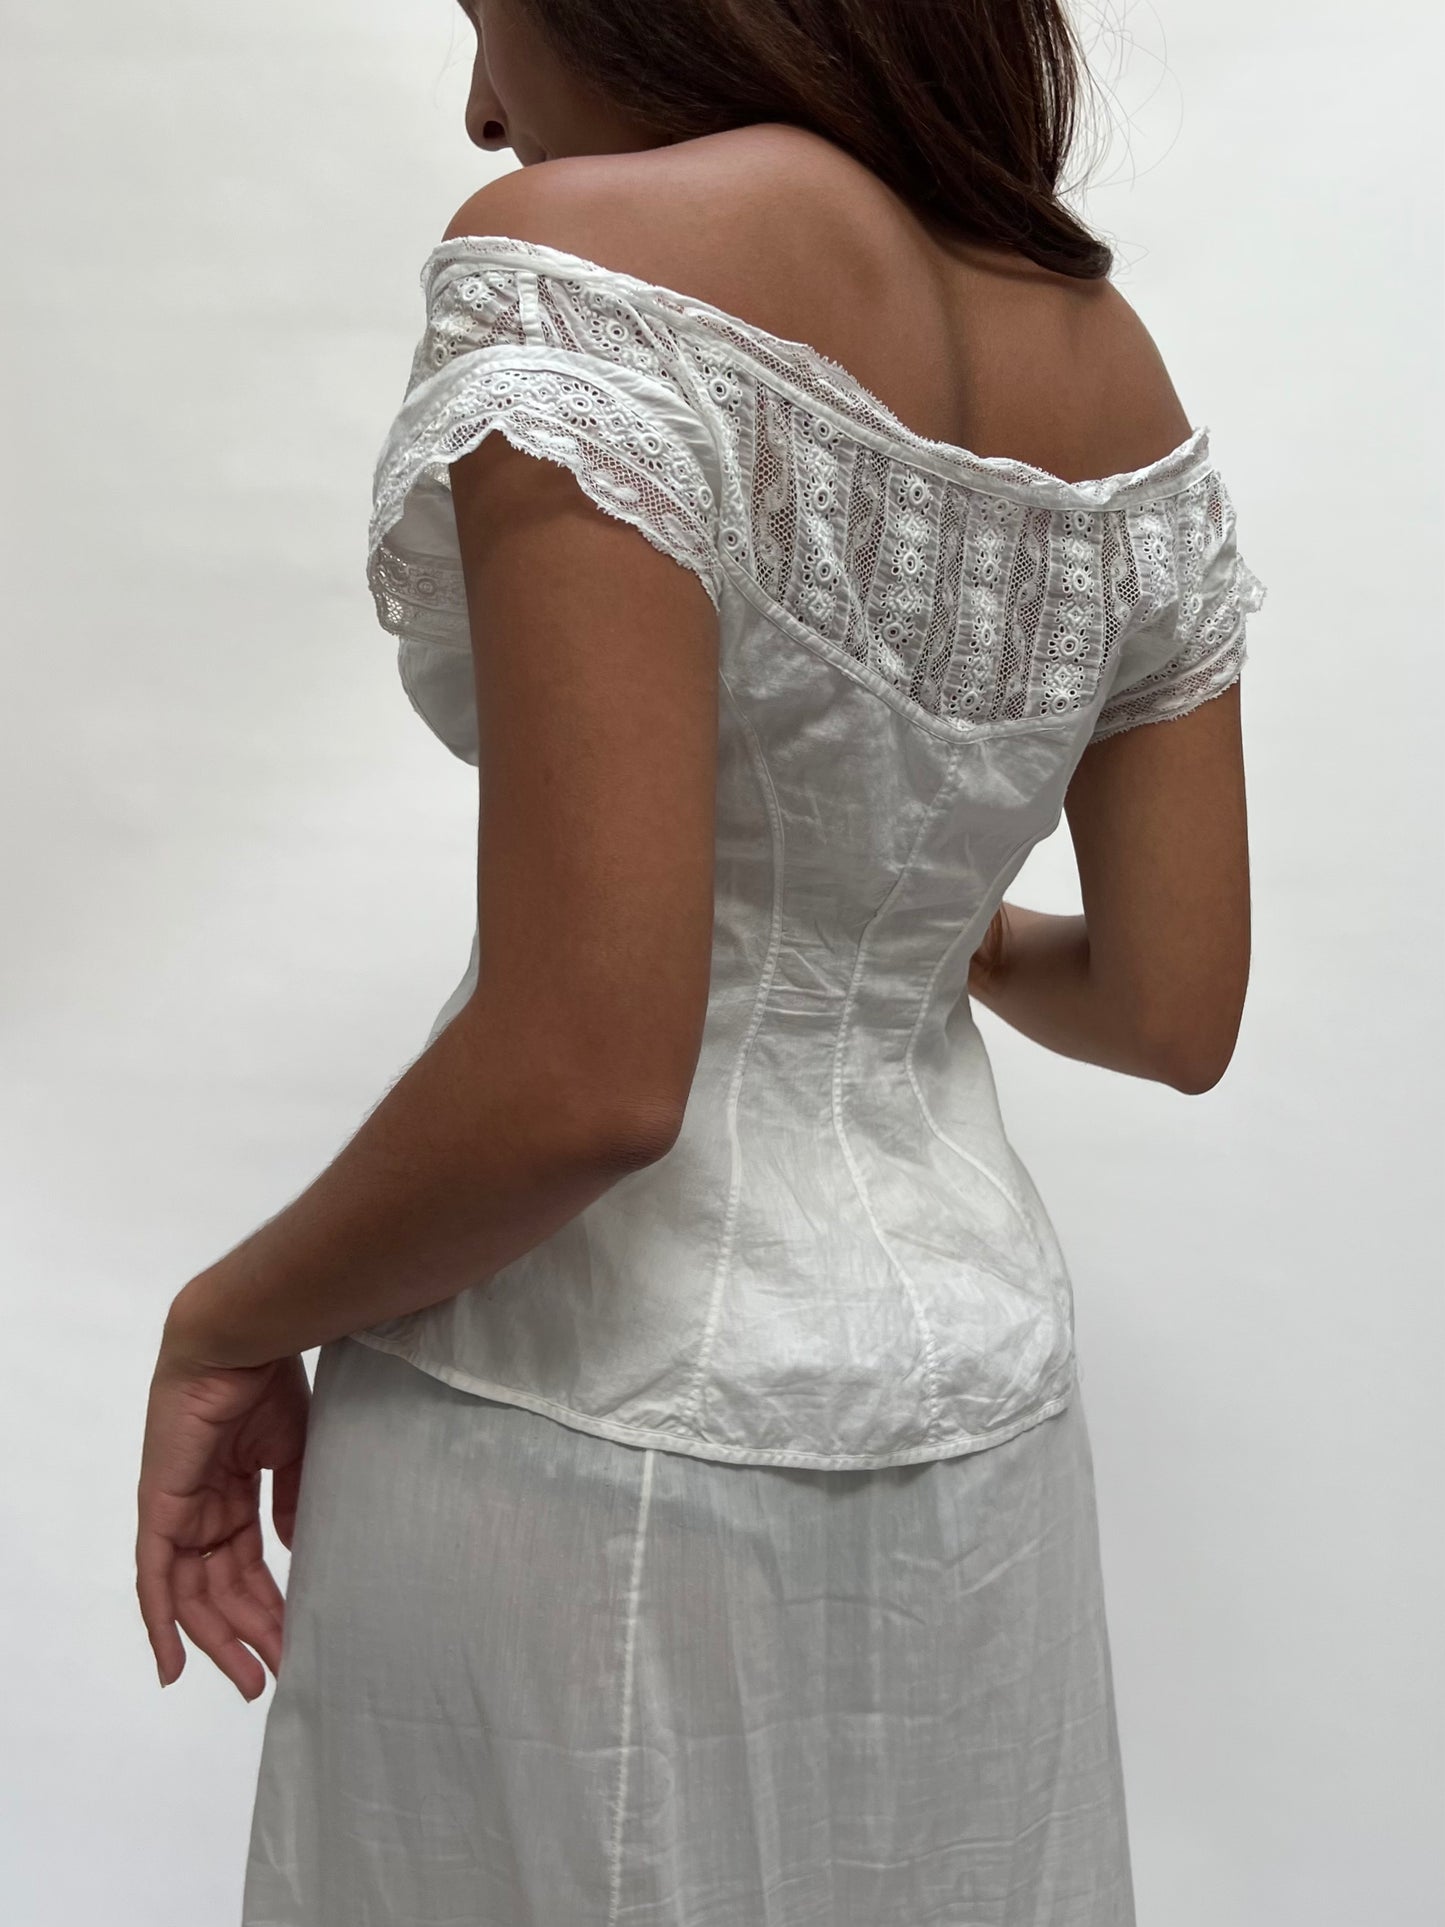 1800s cotton and lace corset cover